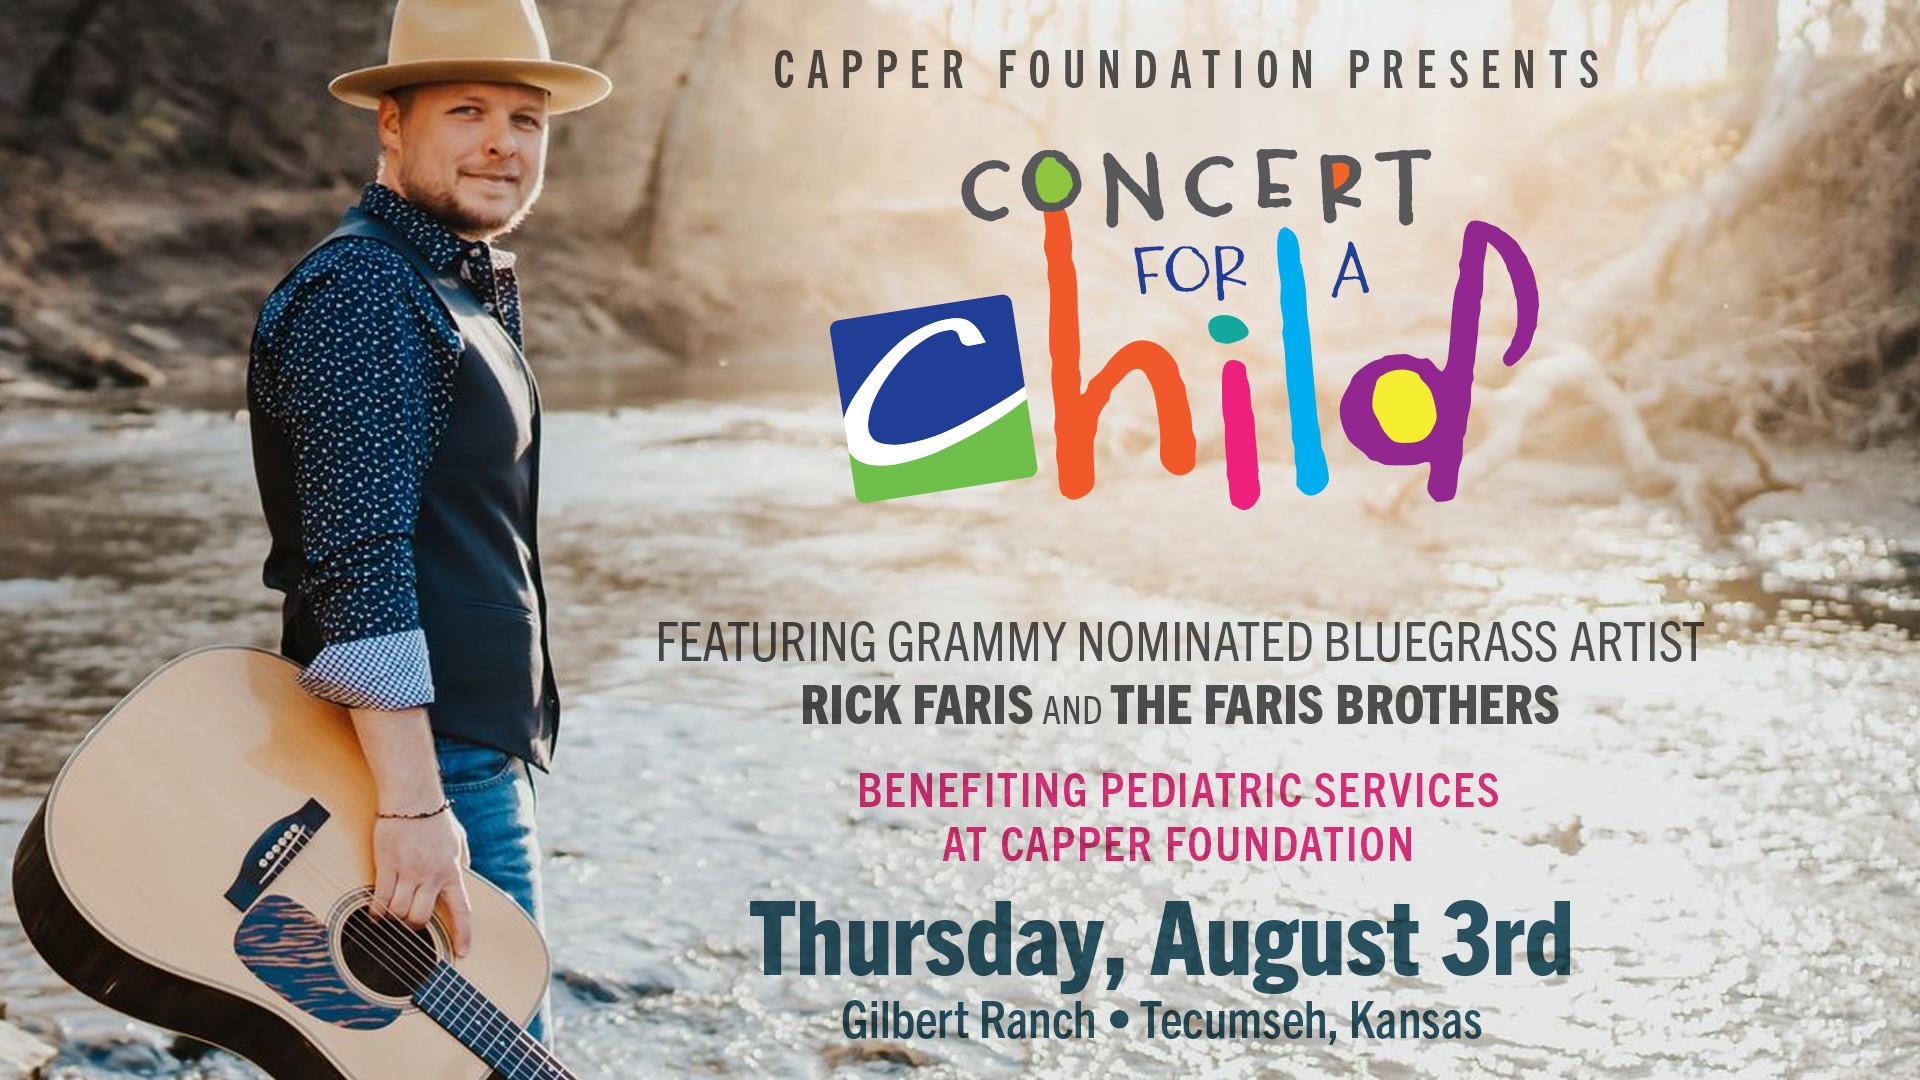 Grammy-nominated artist to perform at the Capper Foundation’s 2023 “Concert for a Child” event